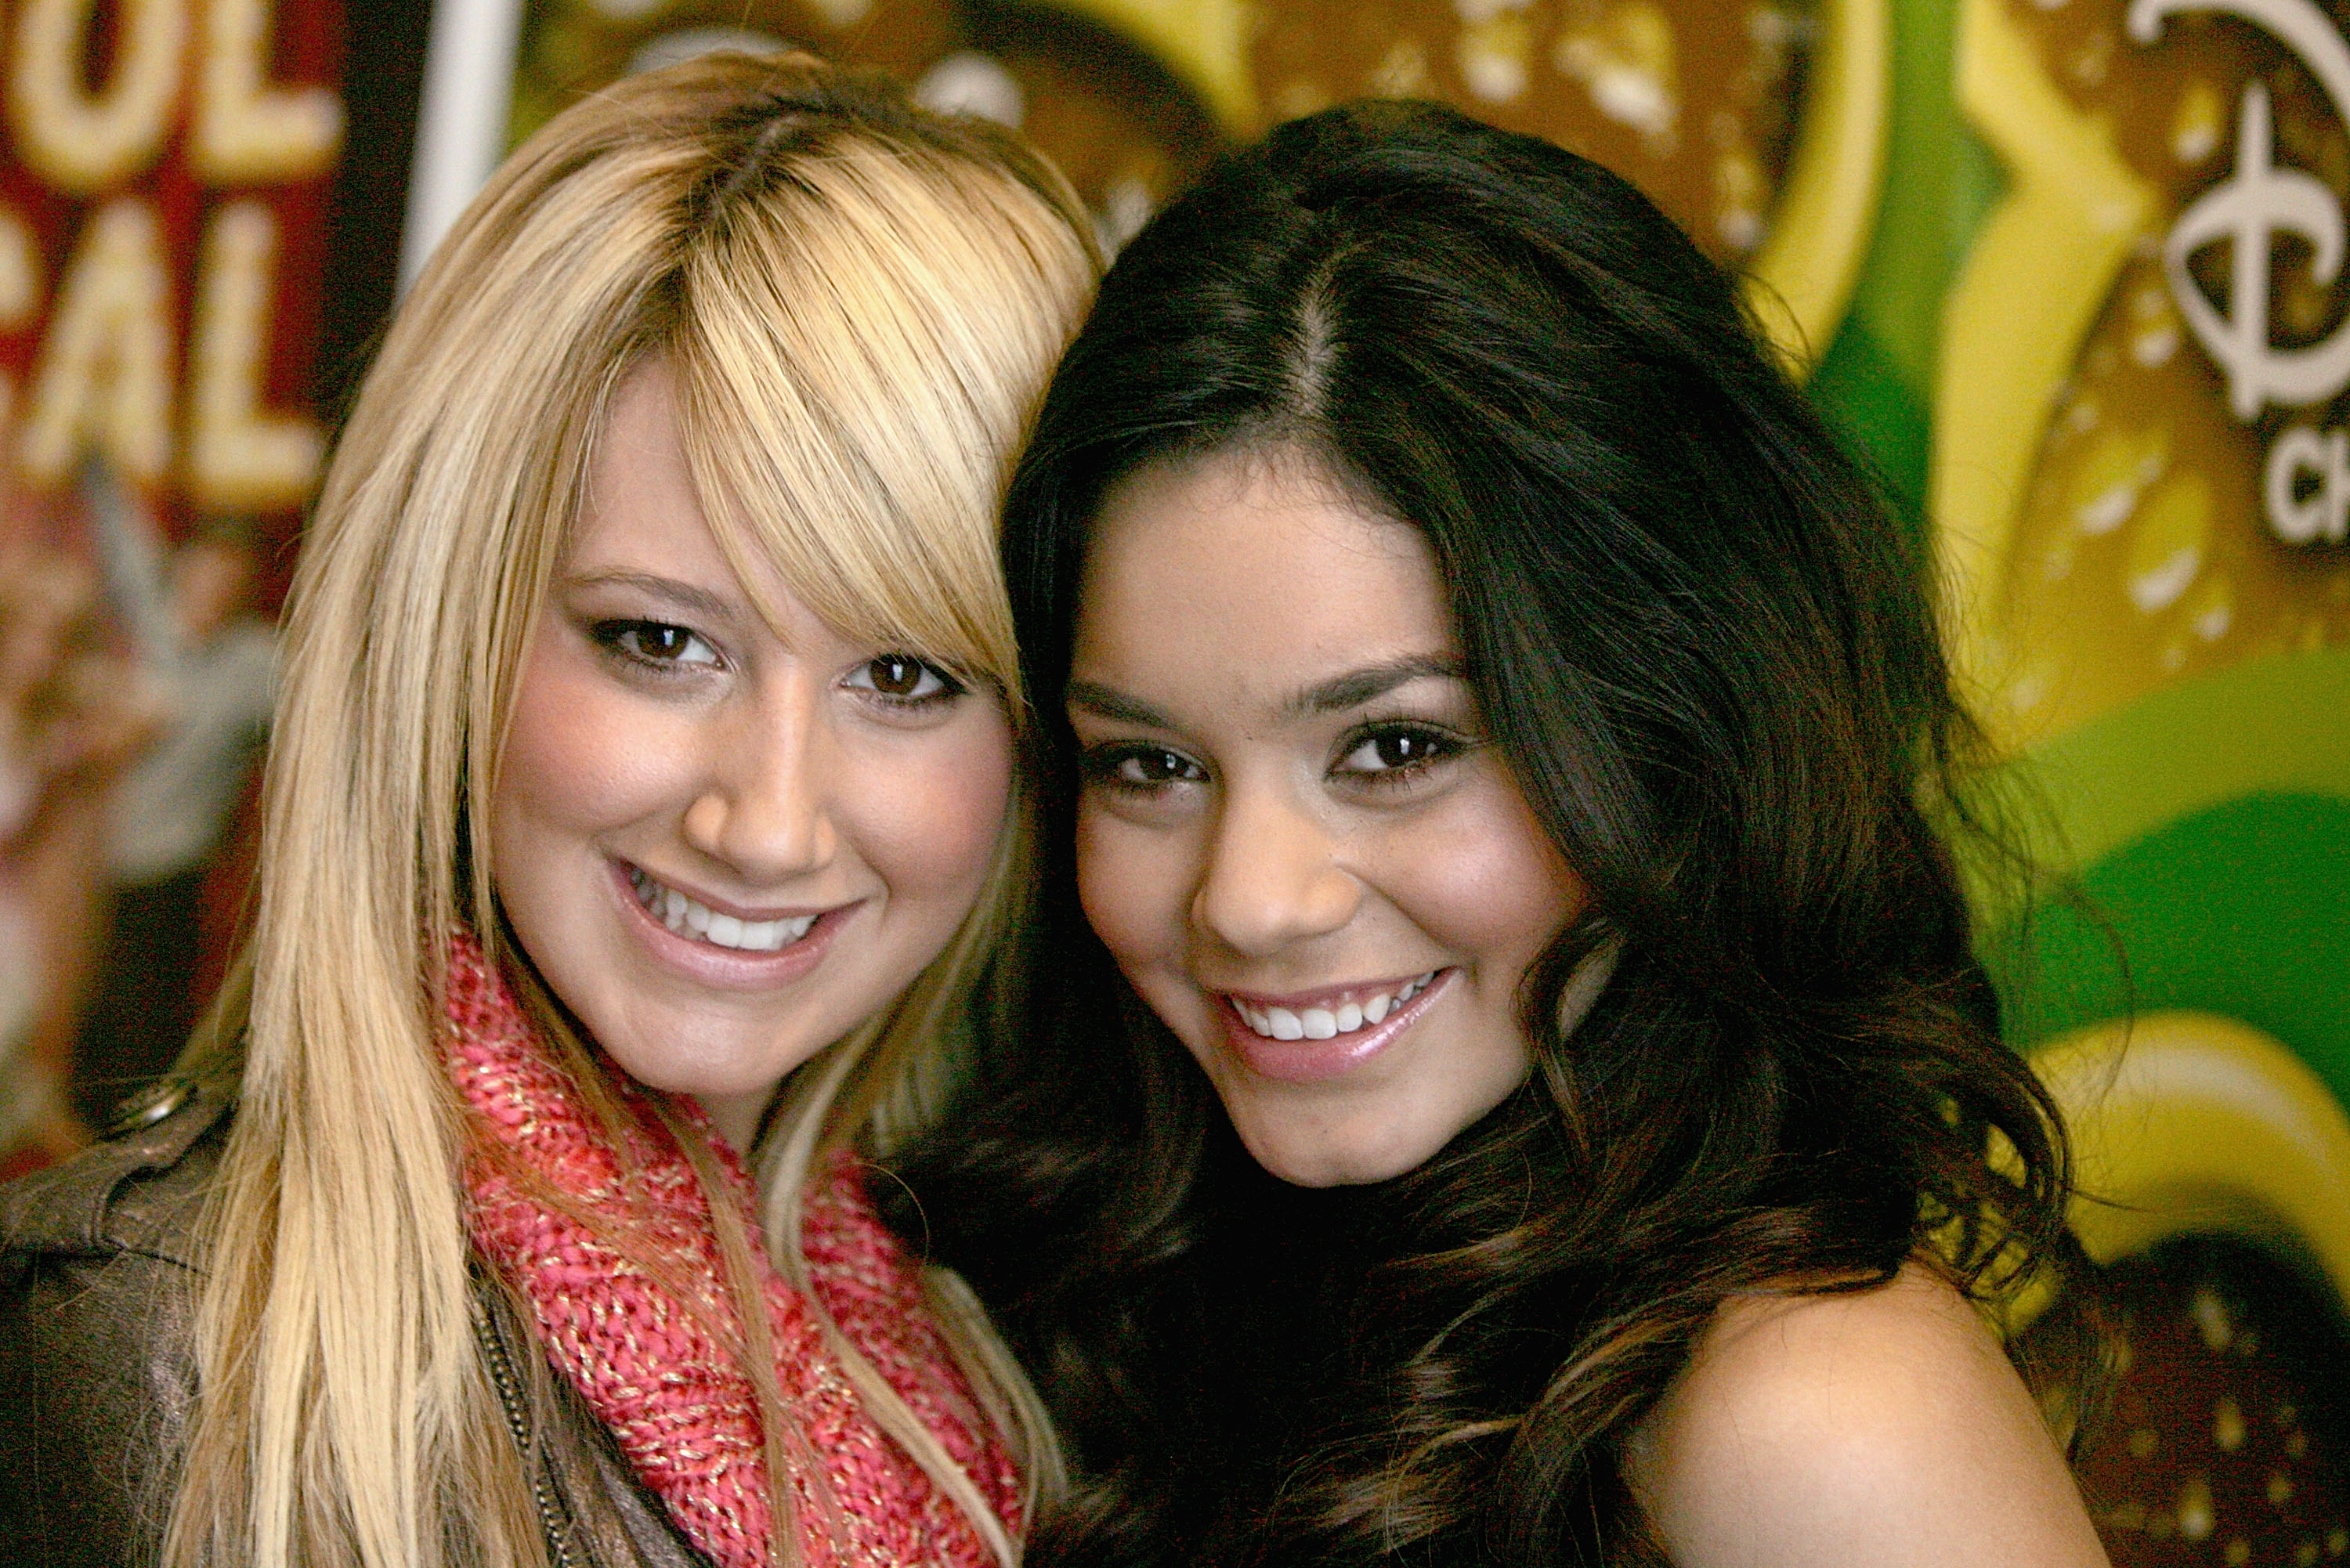 Ashley Tisdale and Vanessa Hudgens (R) attend a breakfast with the cast of 'High School Musical' on December 16, 2005